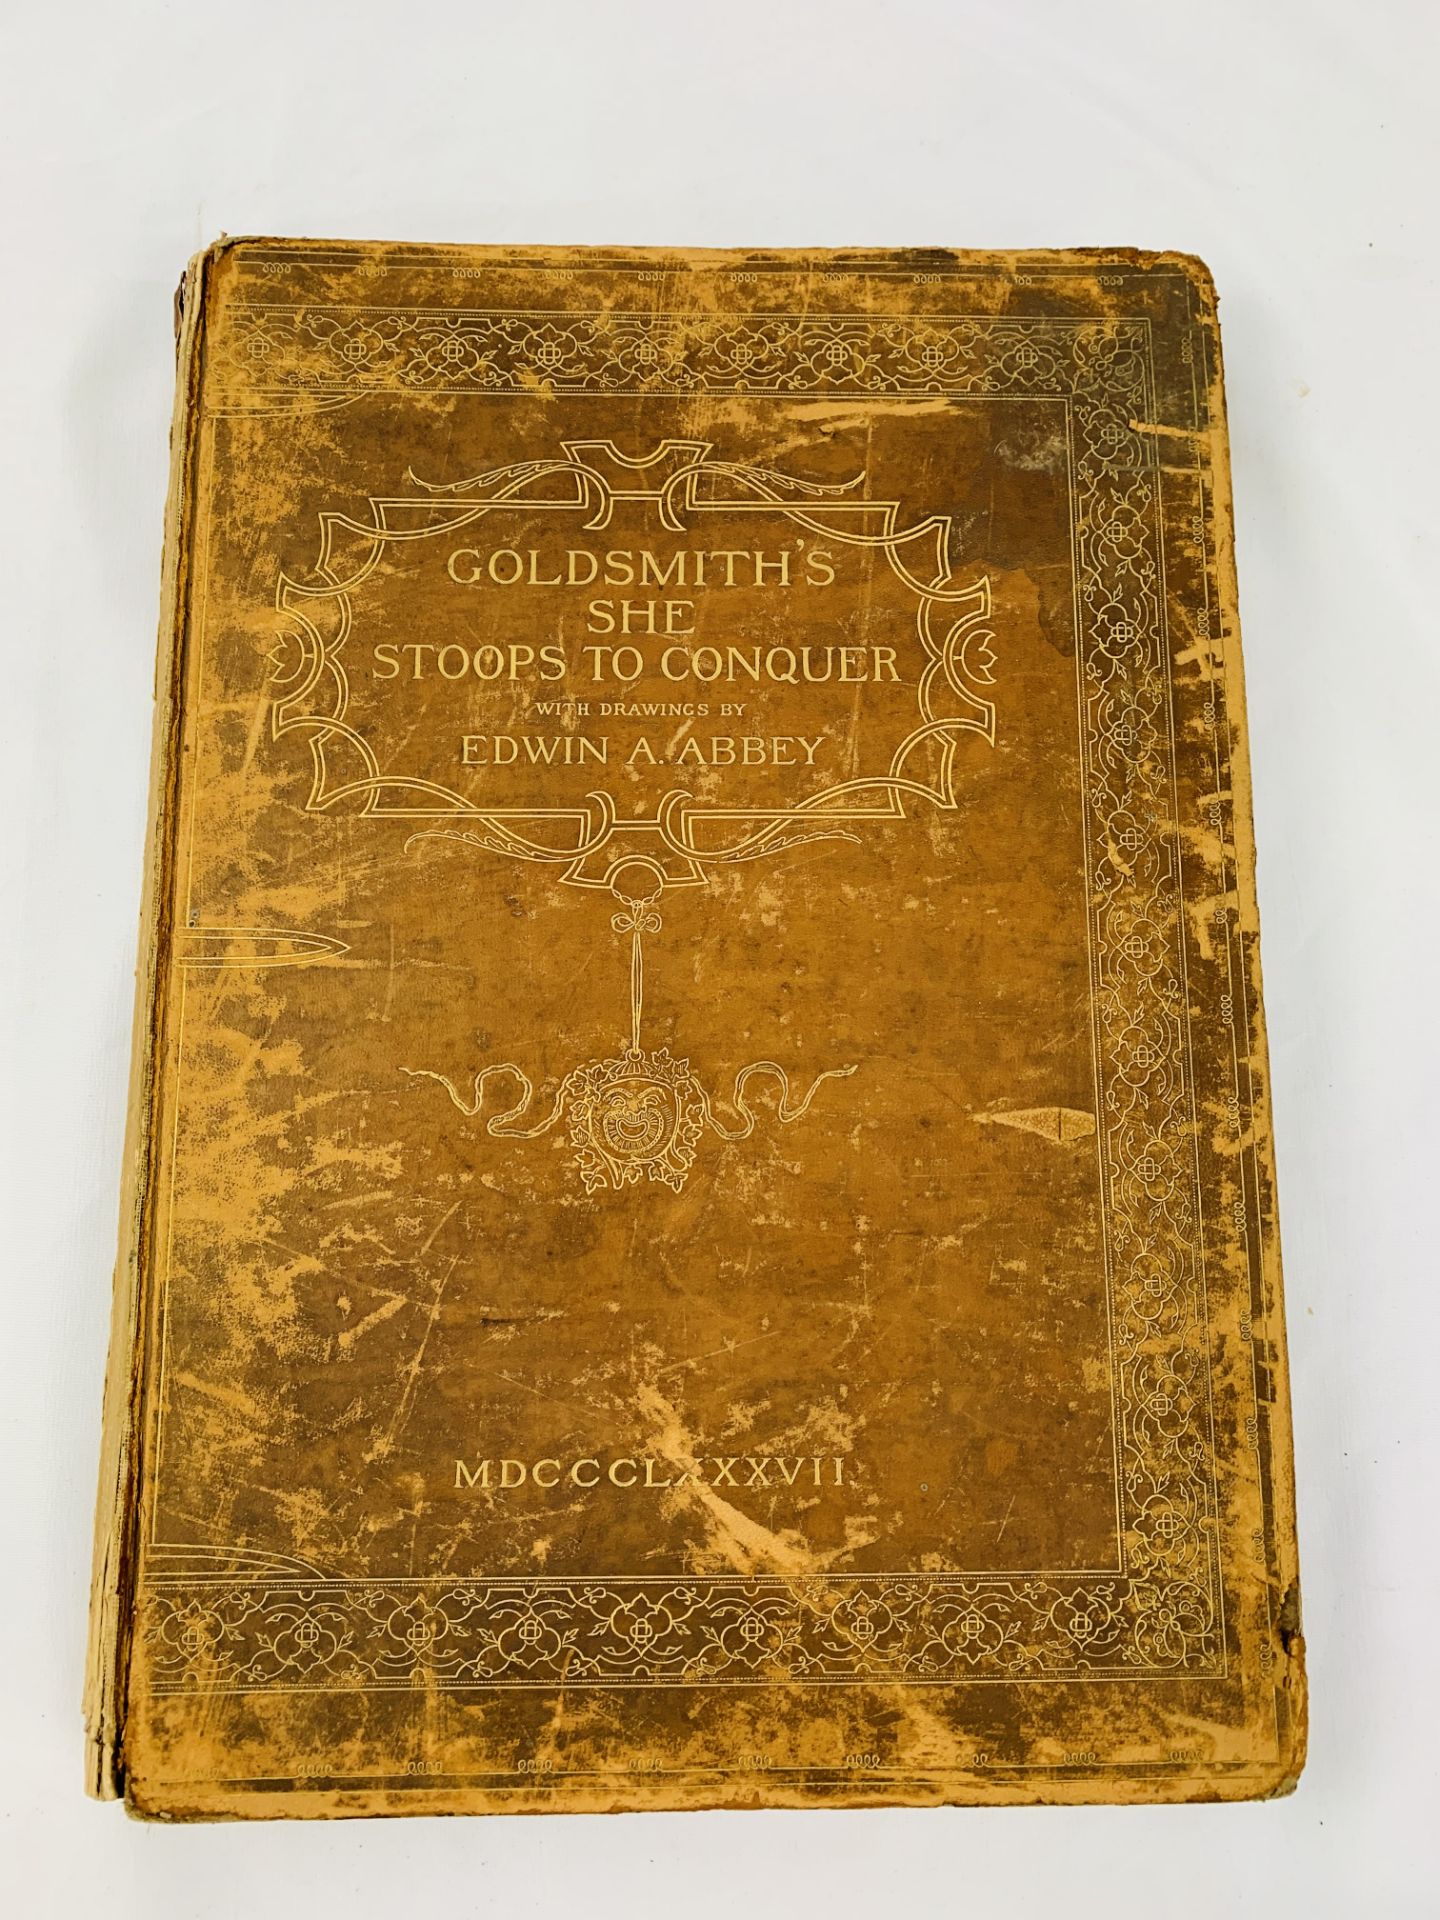 She Stoops to Conquer by Oliver Goldsmith, 1887.